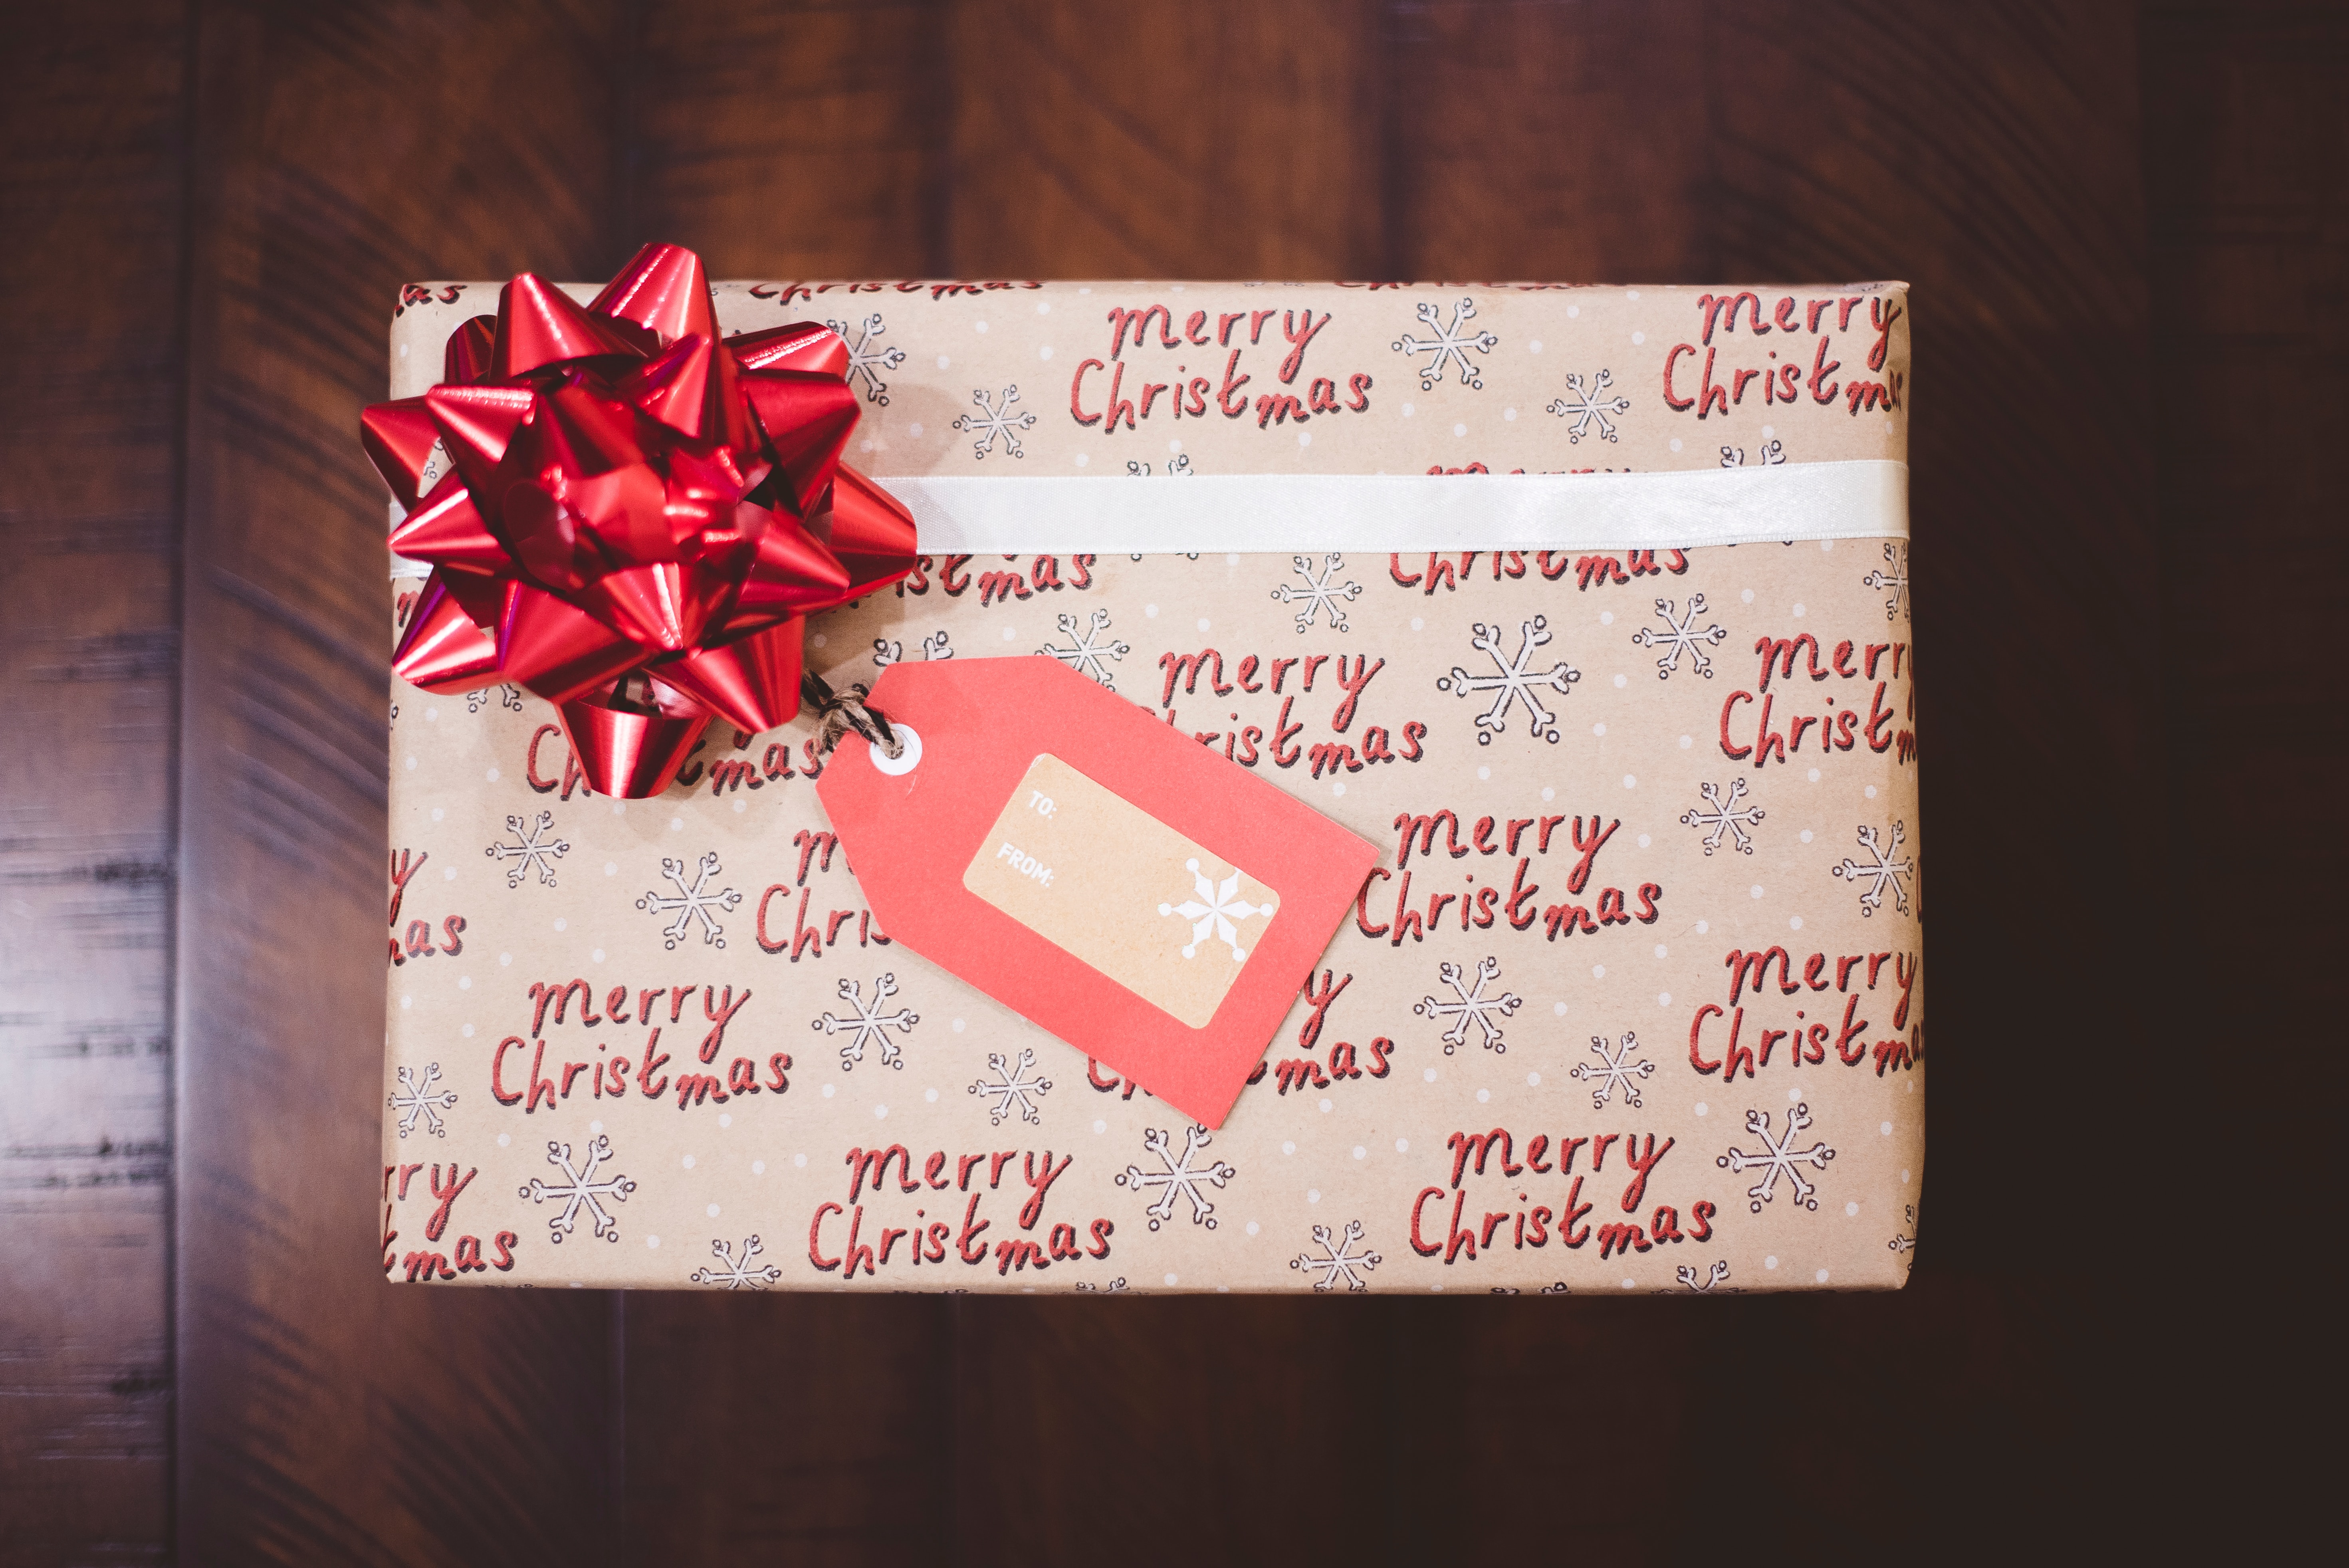 Image shows a rectangluar present with Merry Christmas printed across the wrapping paper. It has a red bow on the top left hand corner.